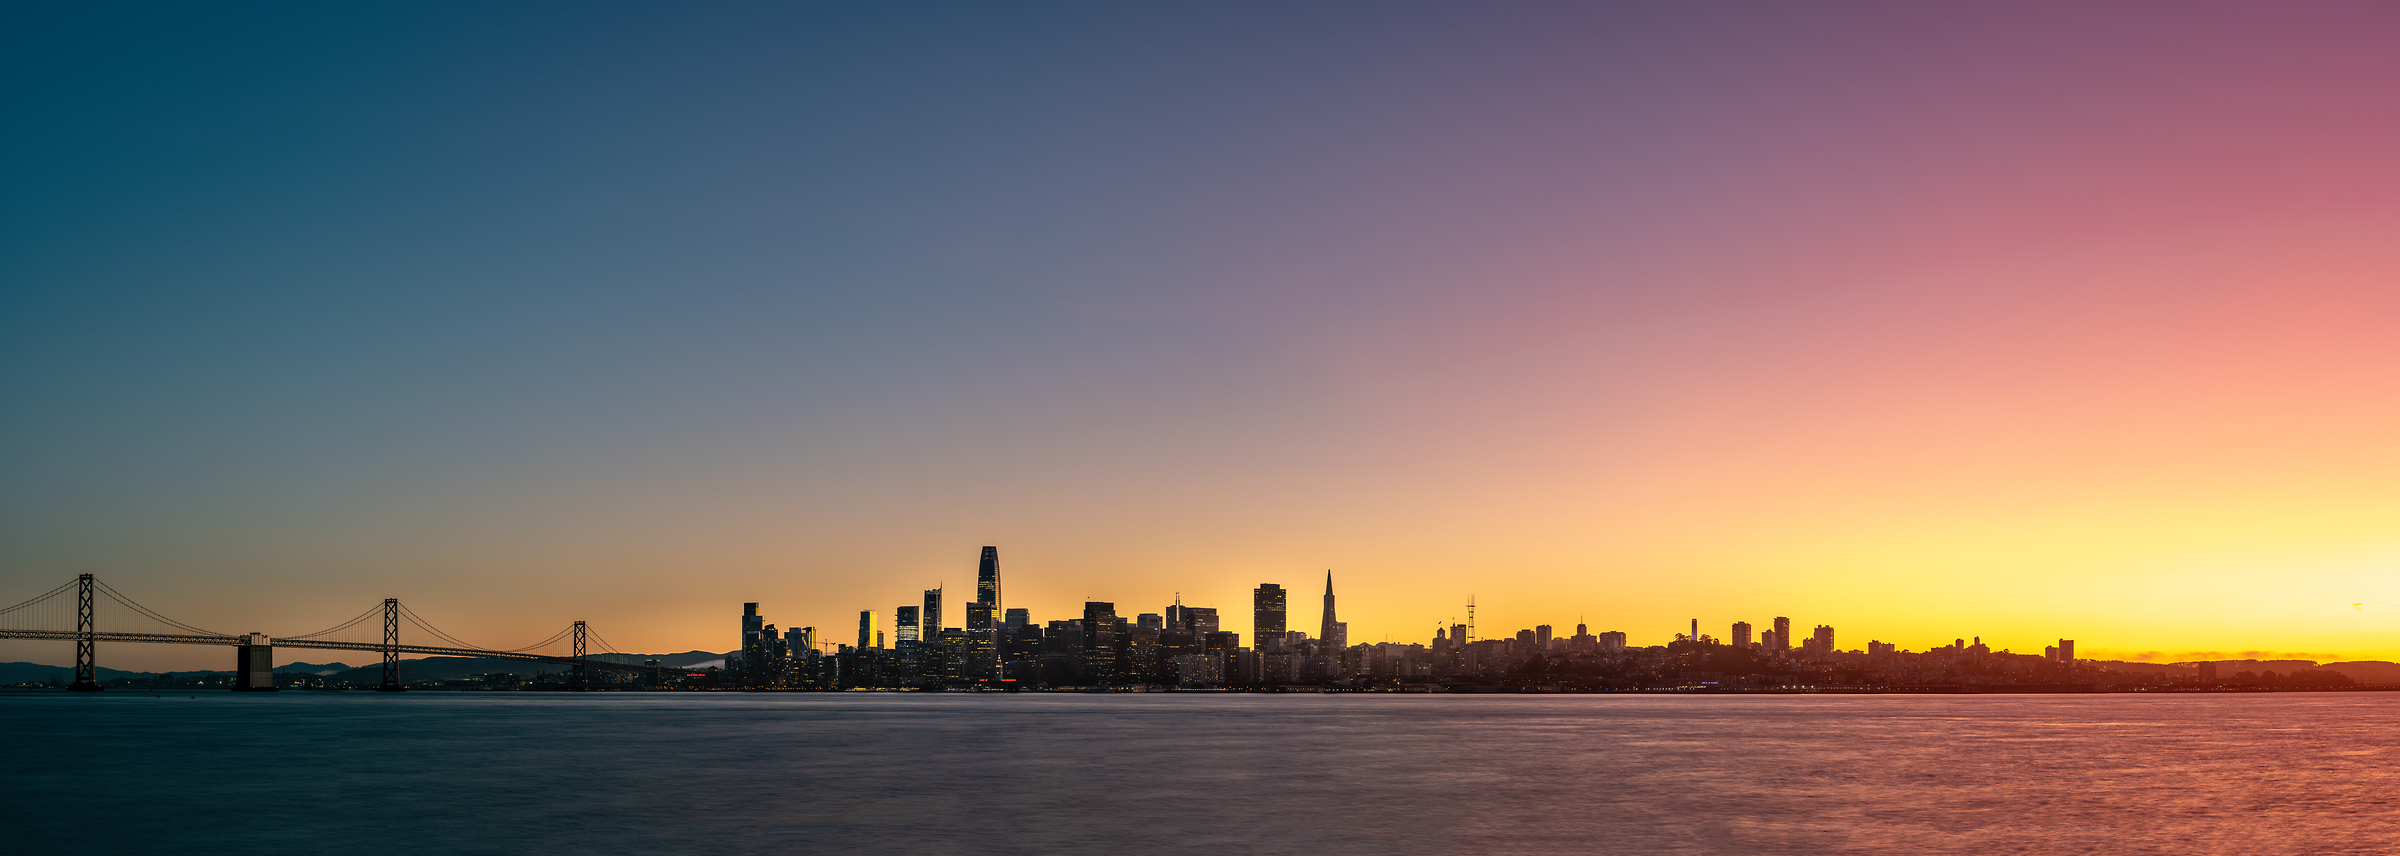 310 megapixels! A very high resolution, large-format VAST photo print of the San Francisco skyline at sunset; cityscape photograph created by Justin Katz in San Francisco, California.